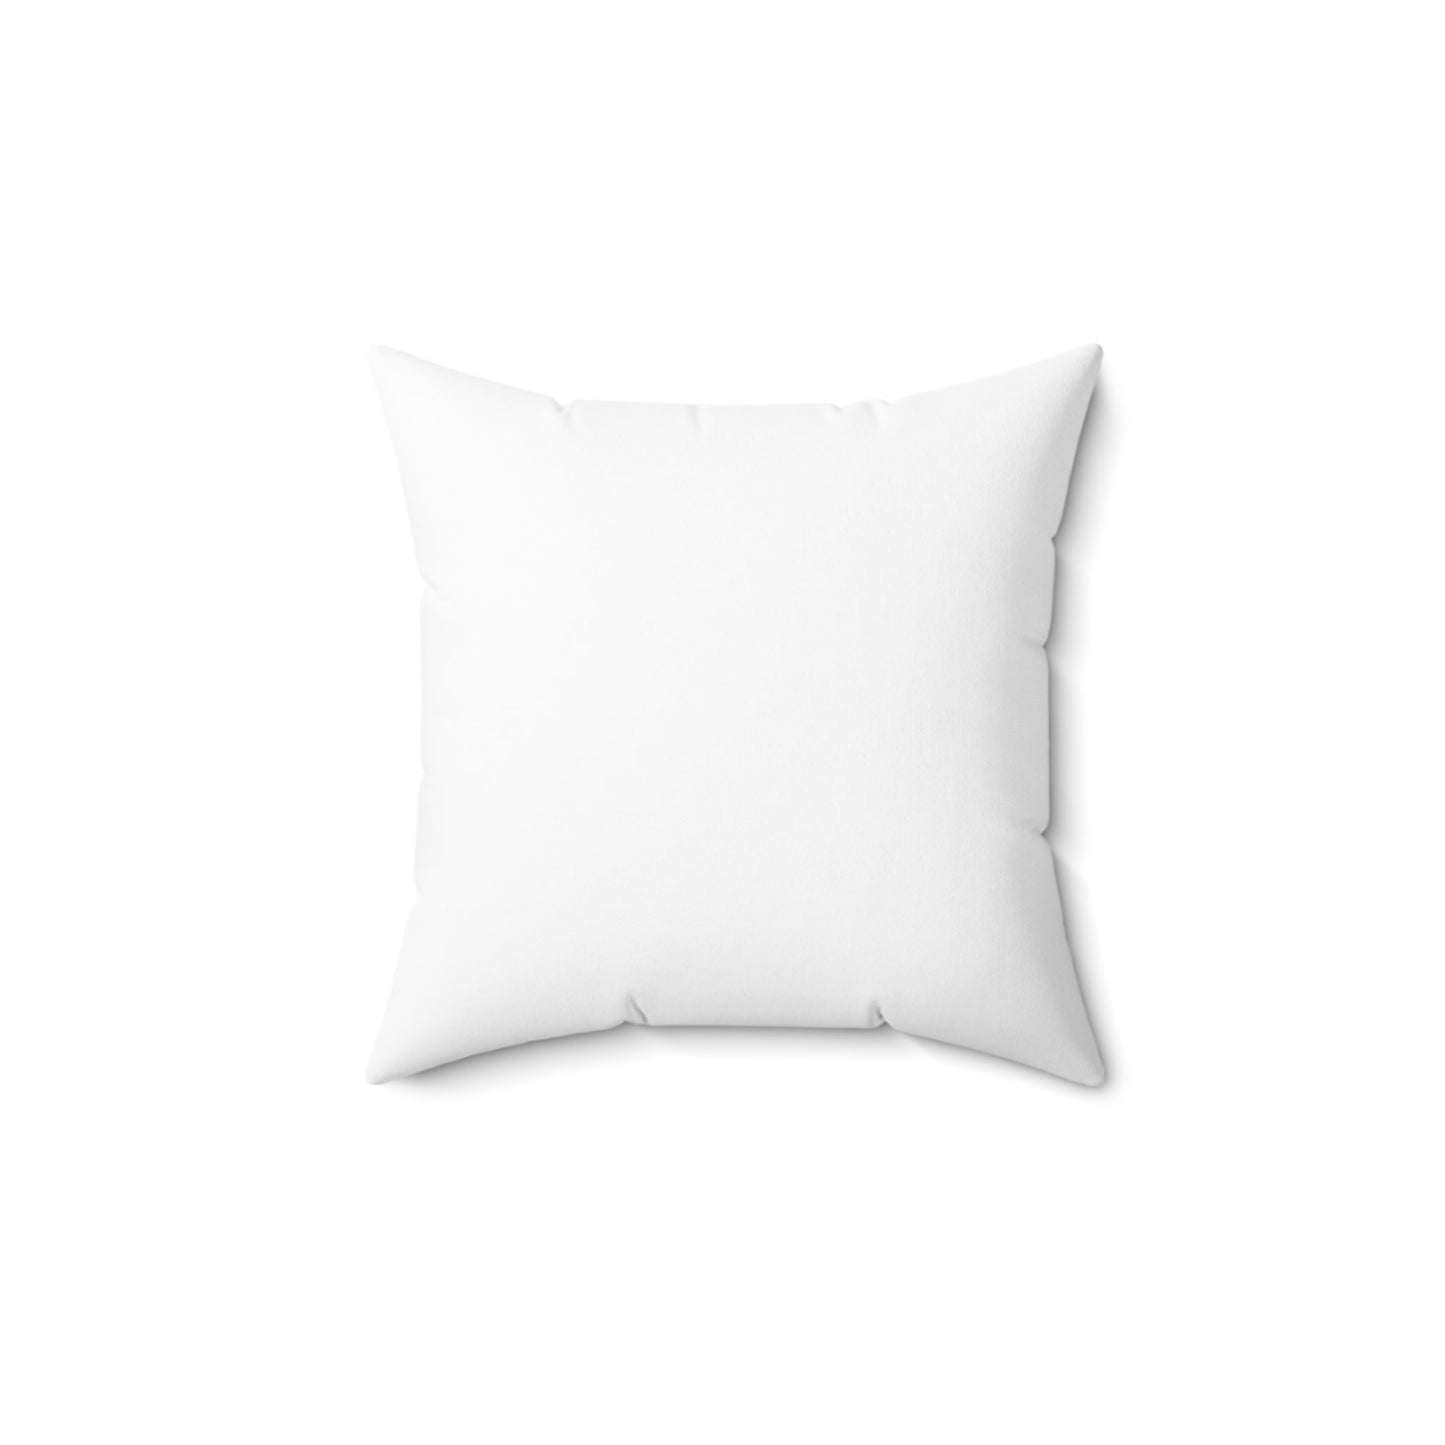 Get trendy with College decor pillow - Home Decor available at Good Gift Company. Grab yours for $21.87 today!